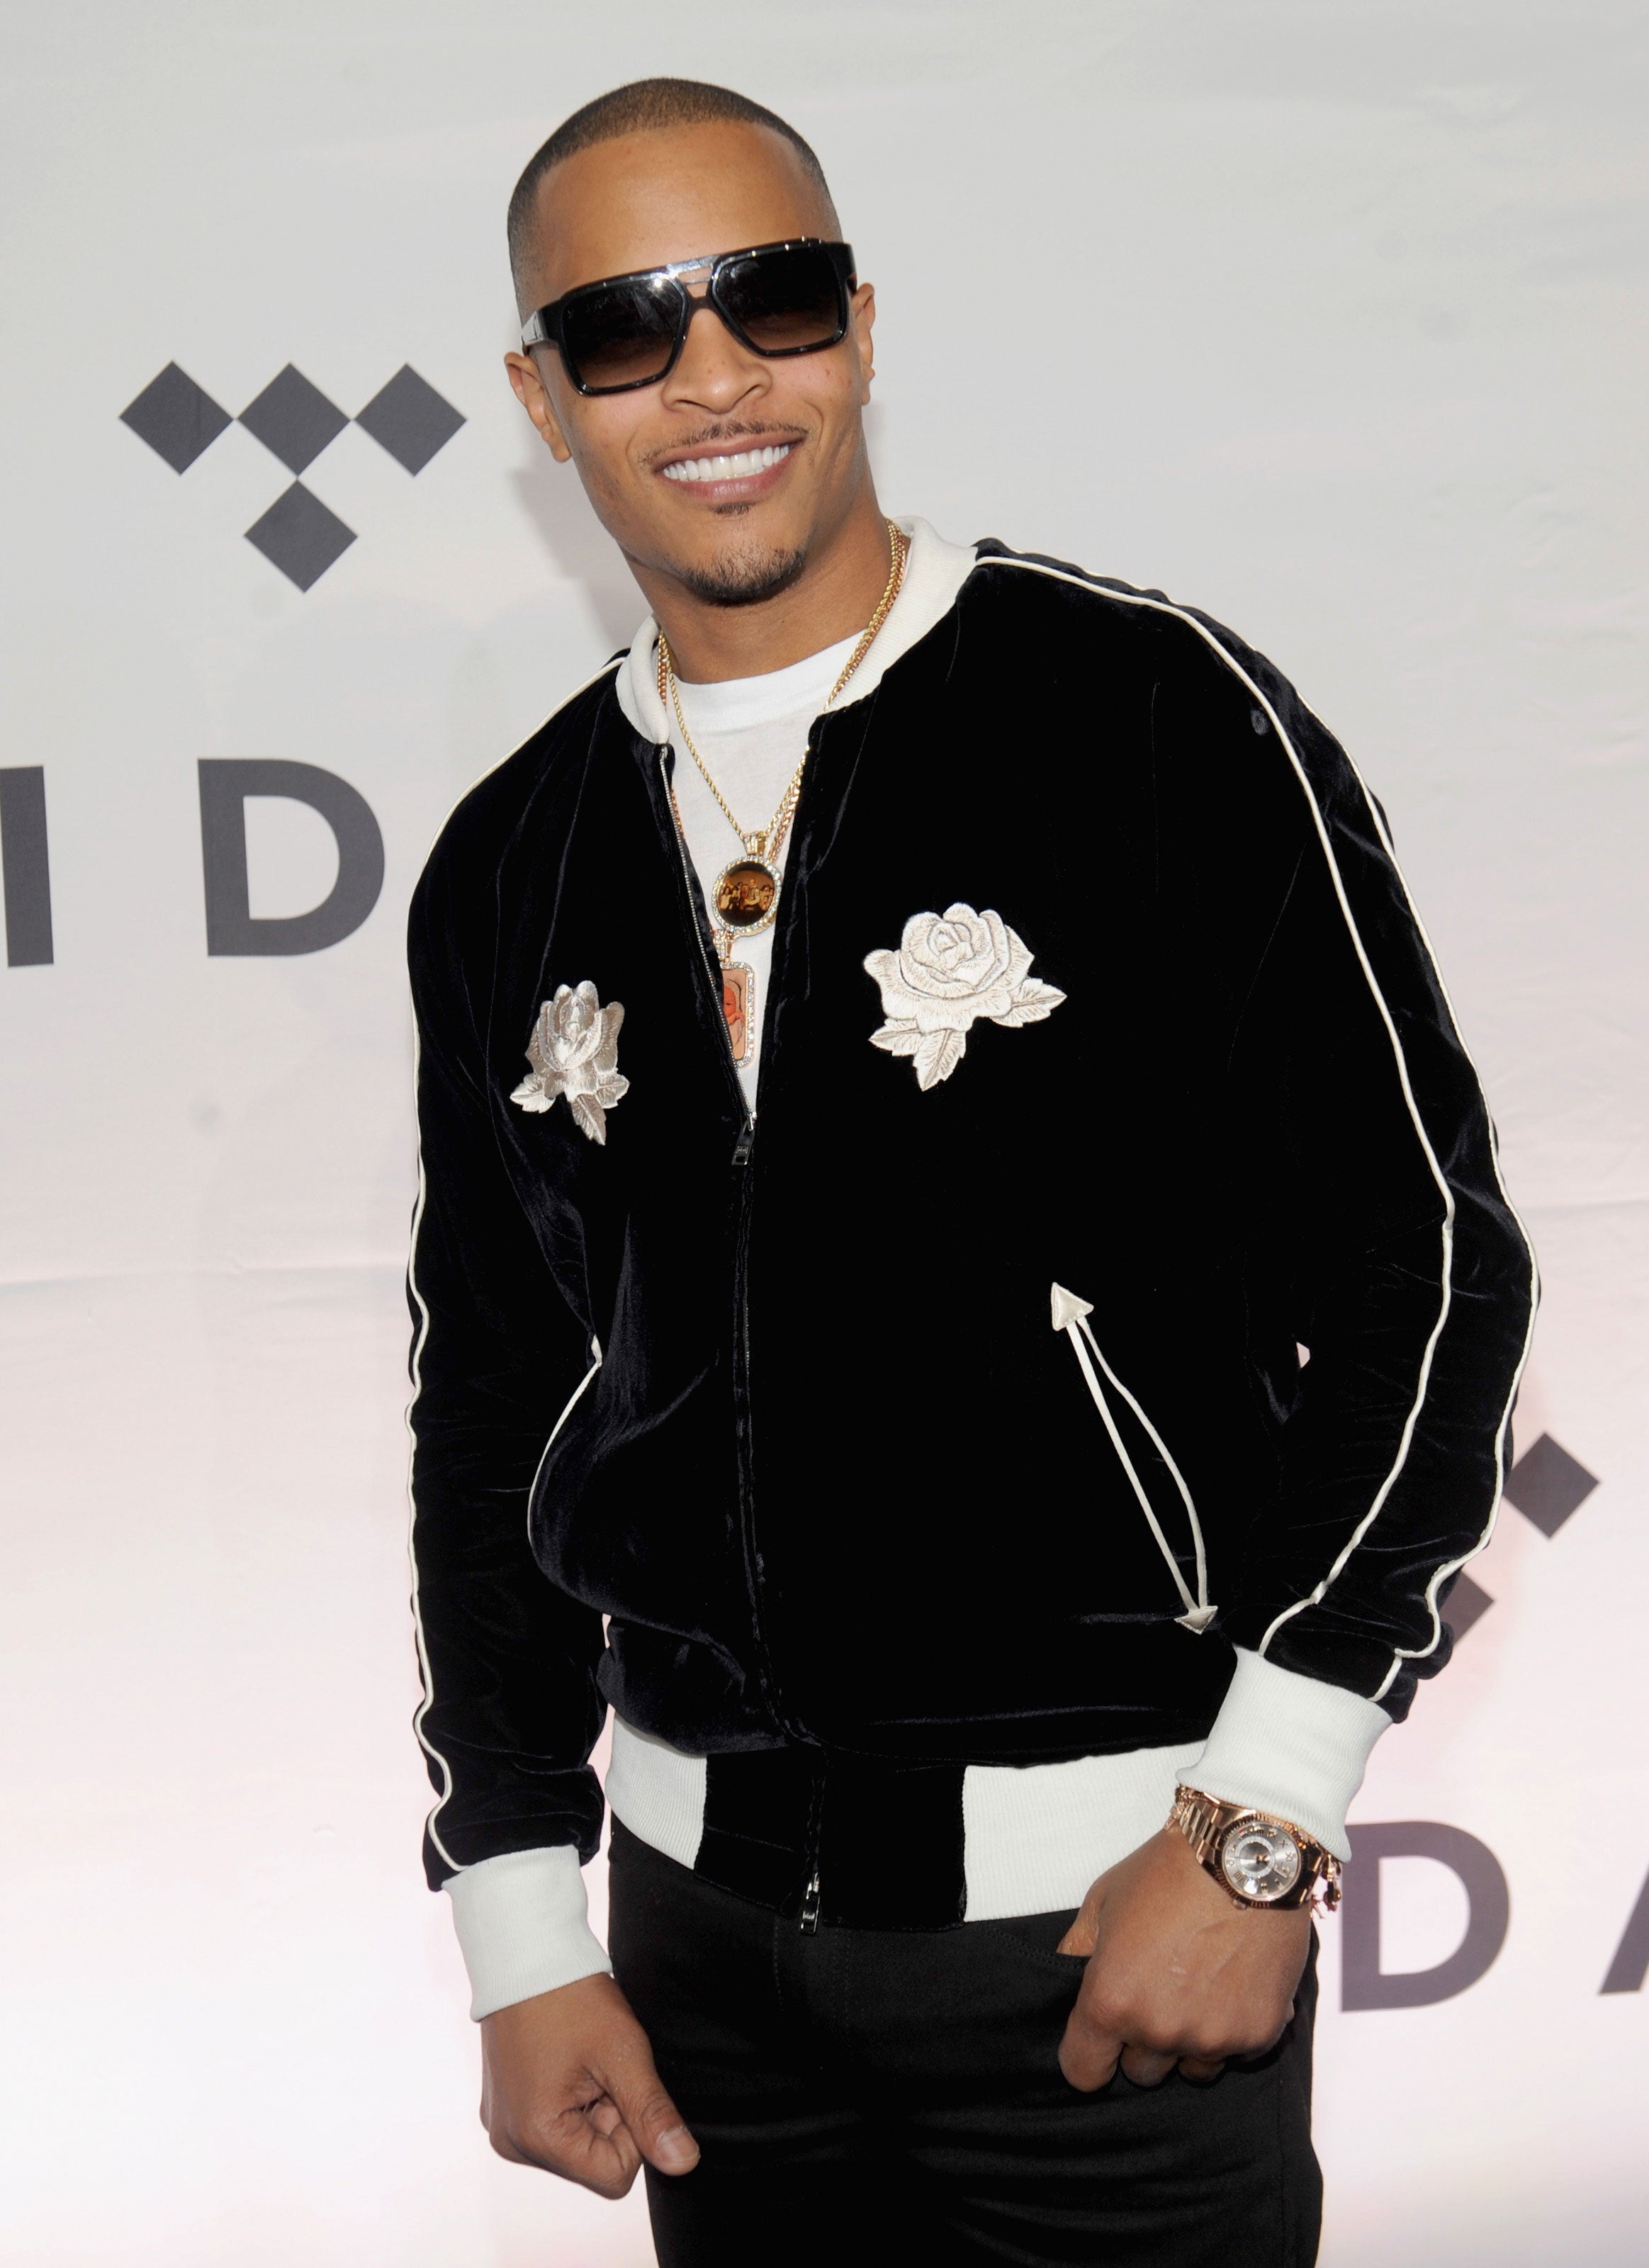 The Hottest Celeb Looks From the Tidal x 1015 Concert
